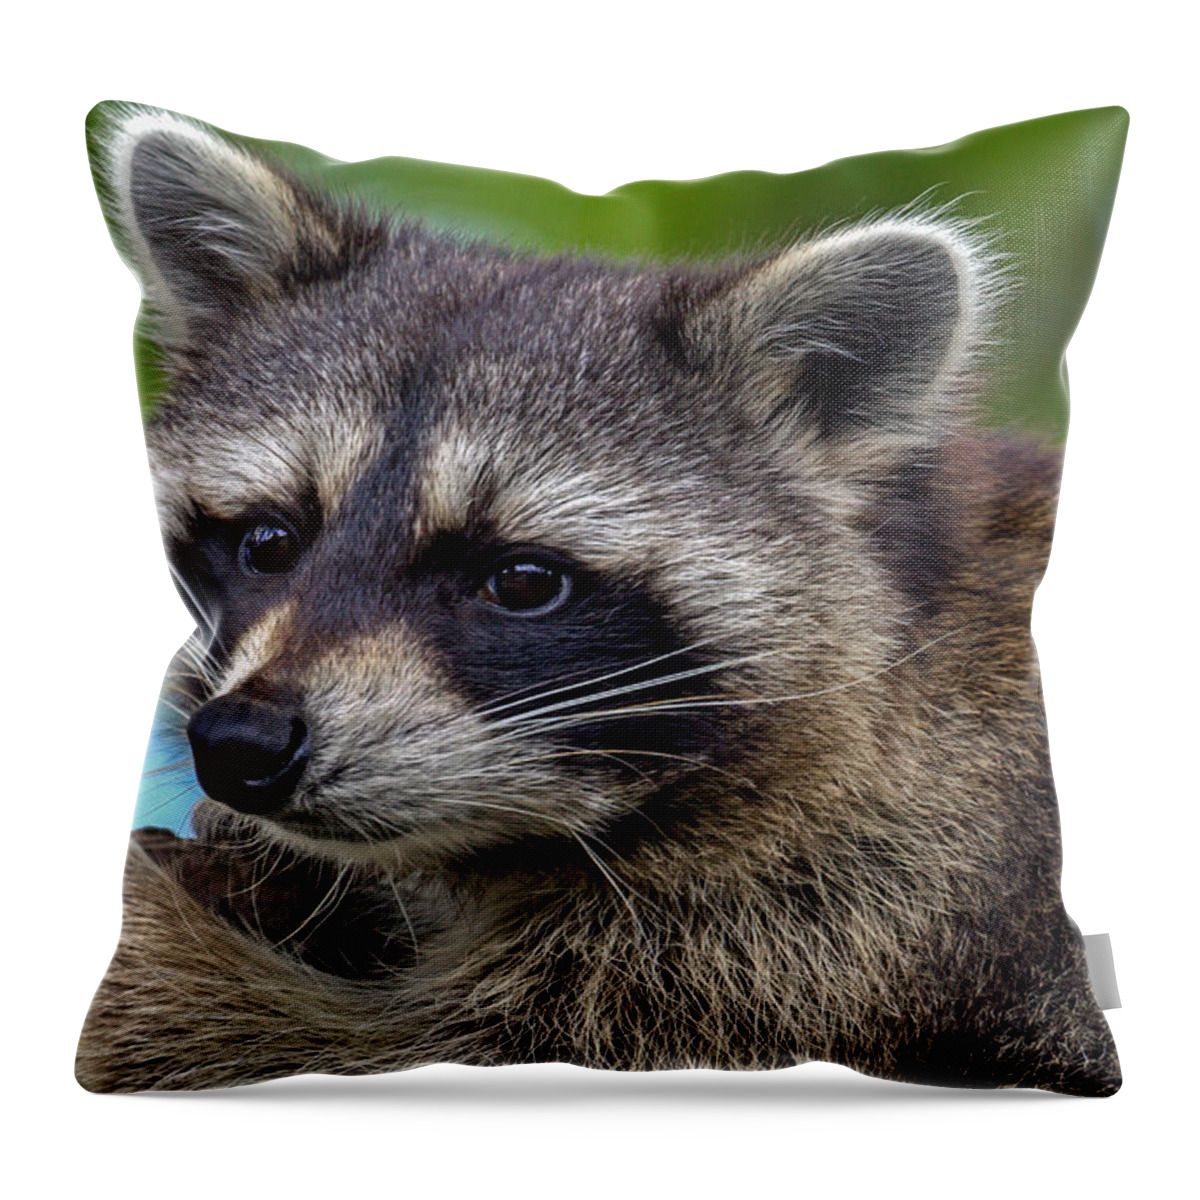 Raccoon Throw Pillow featuring the photograph Raccoon by Jerry Gammon